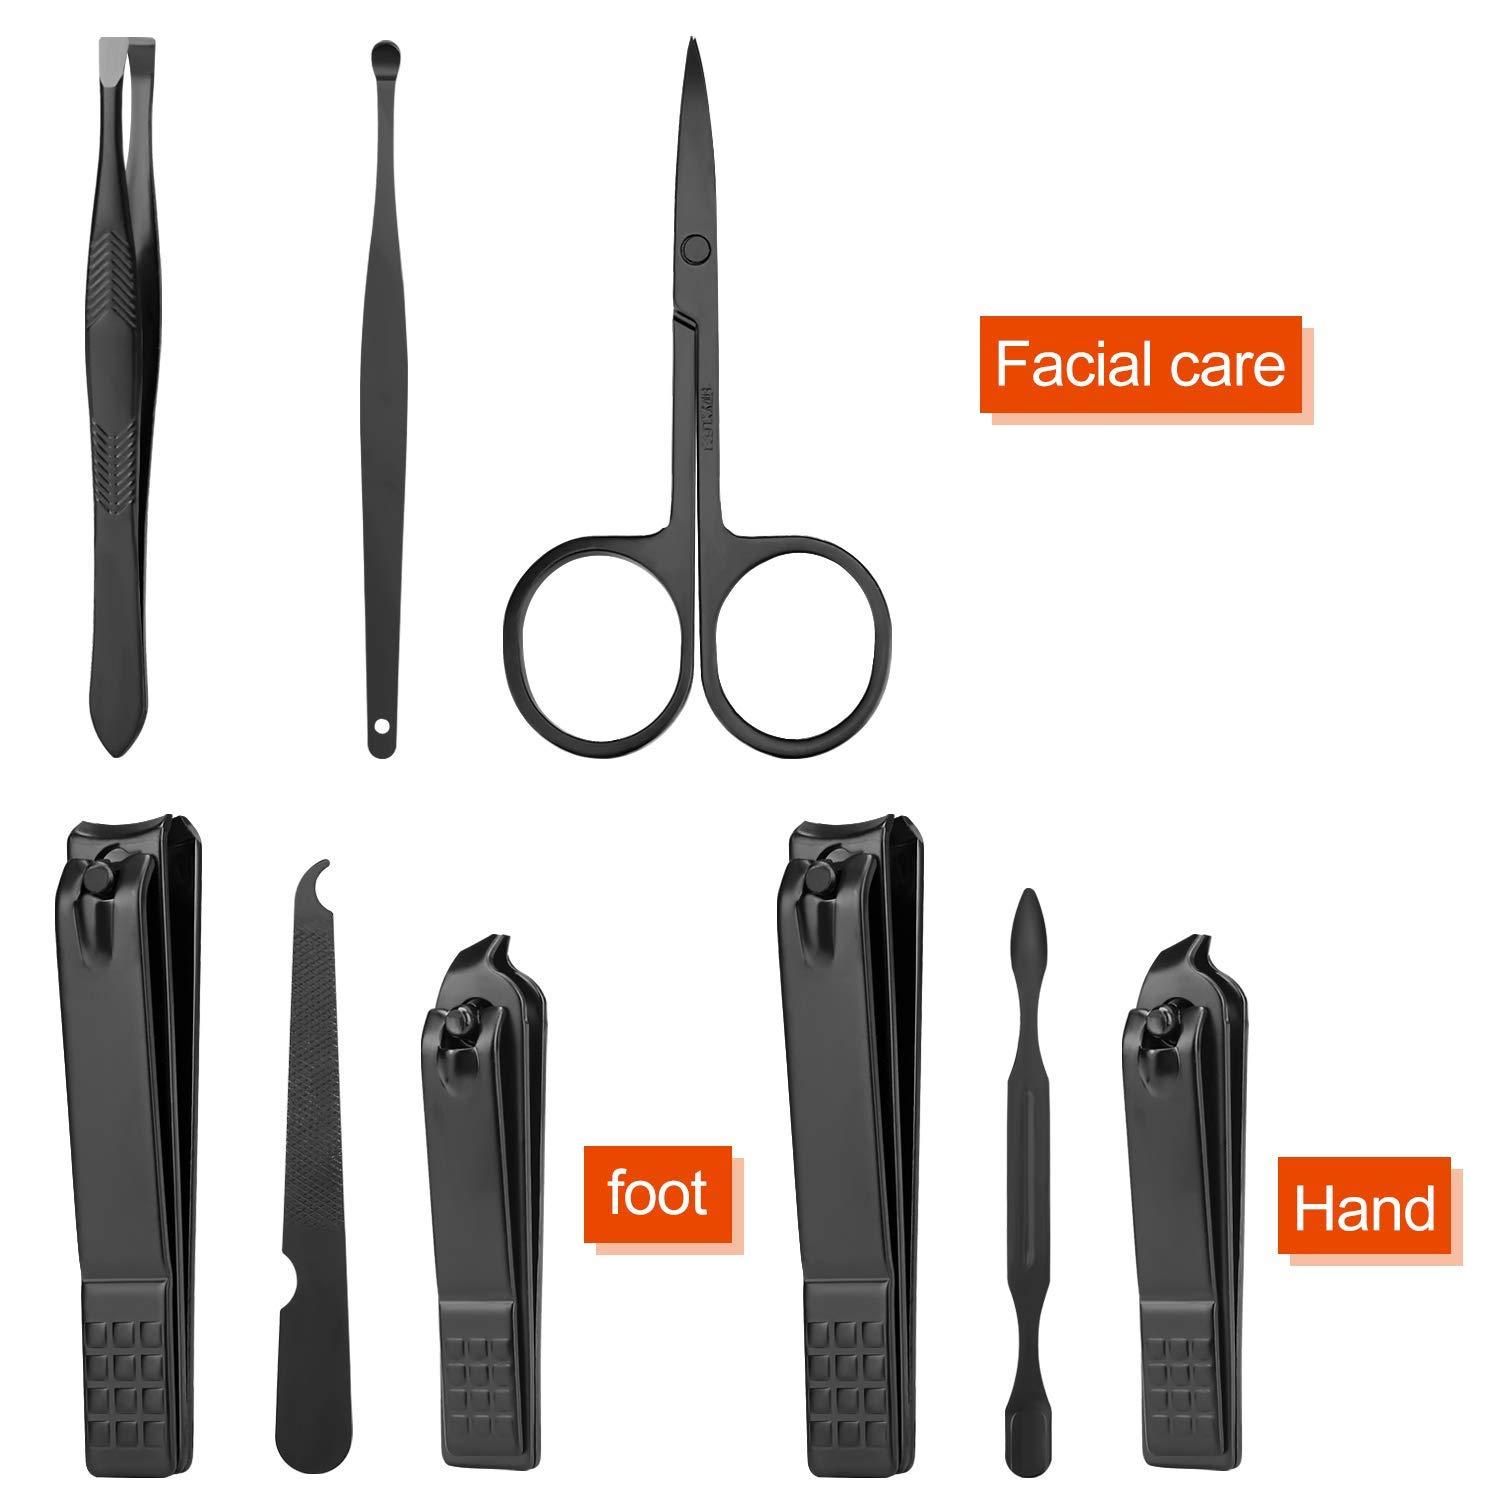 Travel Manicure Set, Mens Grooming kit Women Nail Manicure Kit, Manicure  Pedicure Kit Manicure Set Professional Gift for Family Friends Elder  Patient